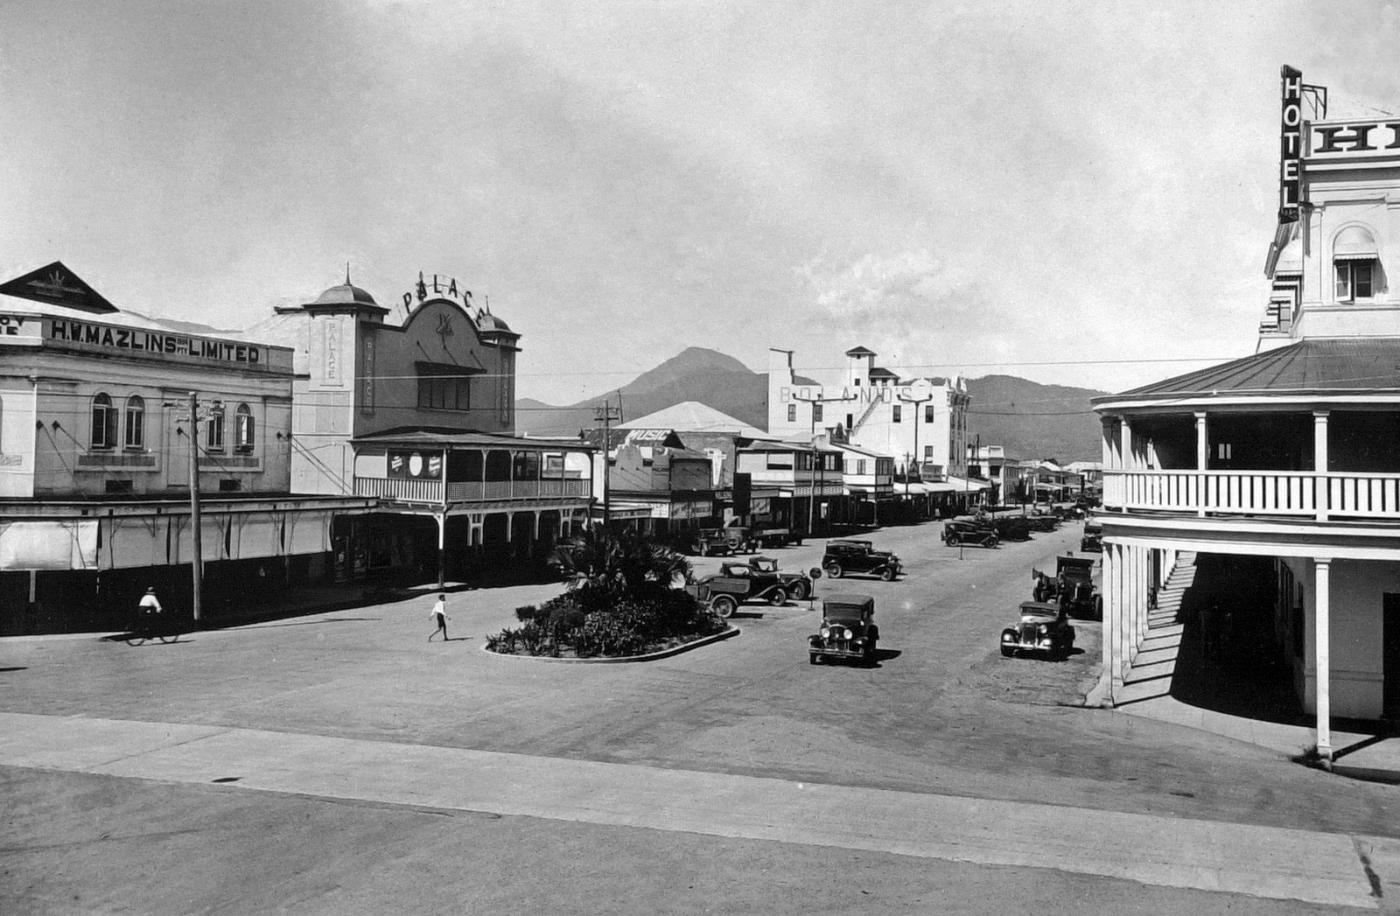 Street scape of Lake Street in Cairns showing some stores and an empty street